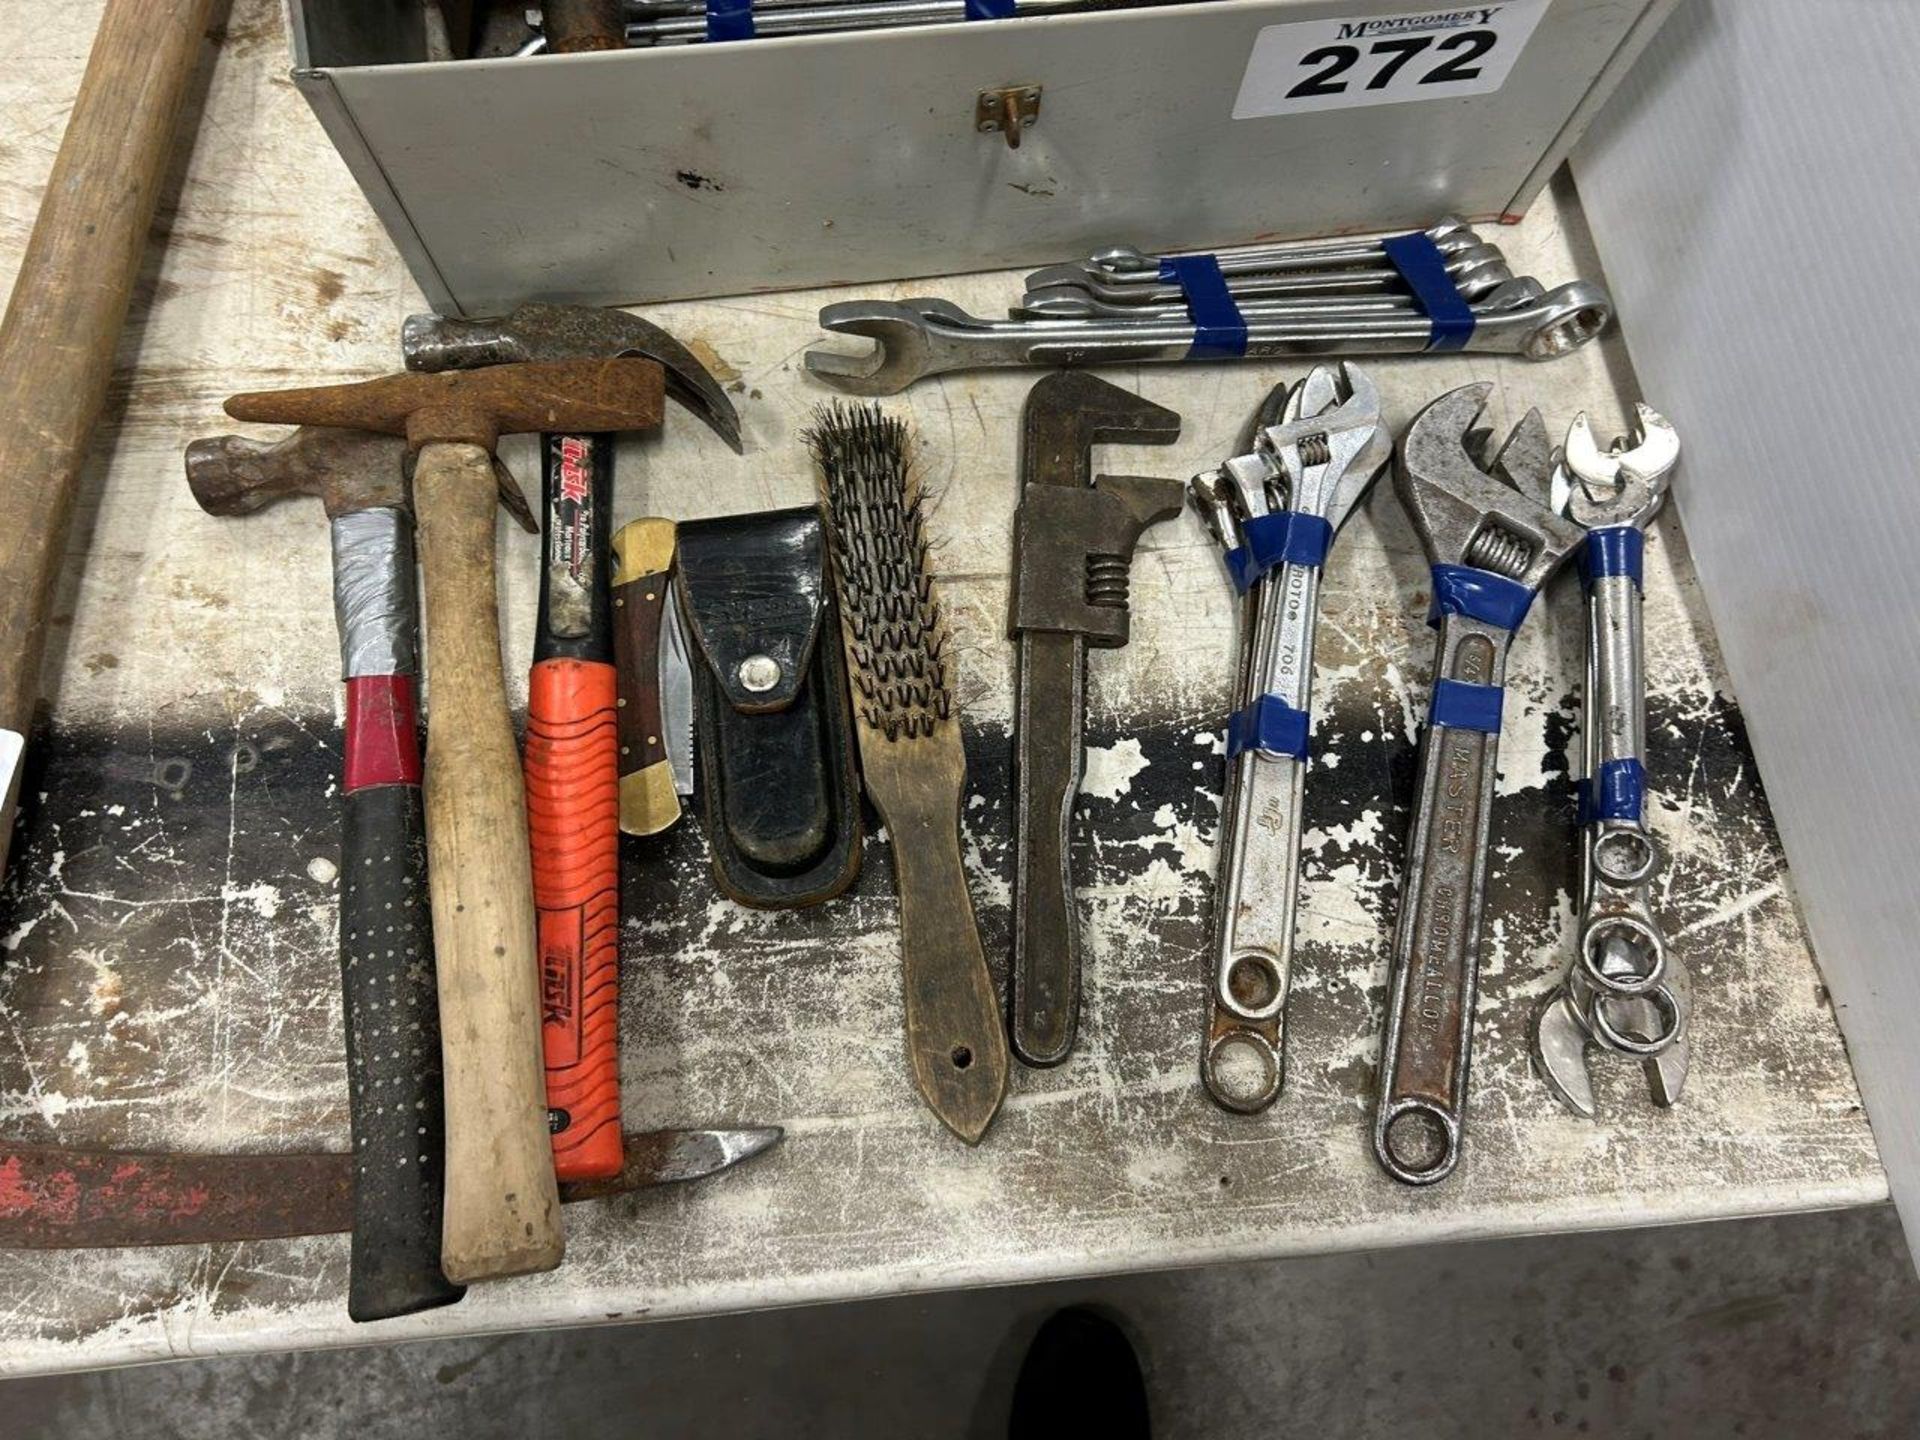 ASSORTED ADJUSTABLE WRENCHES, COMBINATION WRENCHES, HAMMERS, ETC. - Image 3 of 5